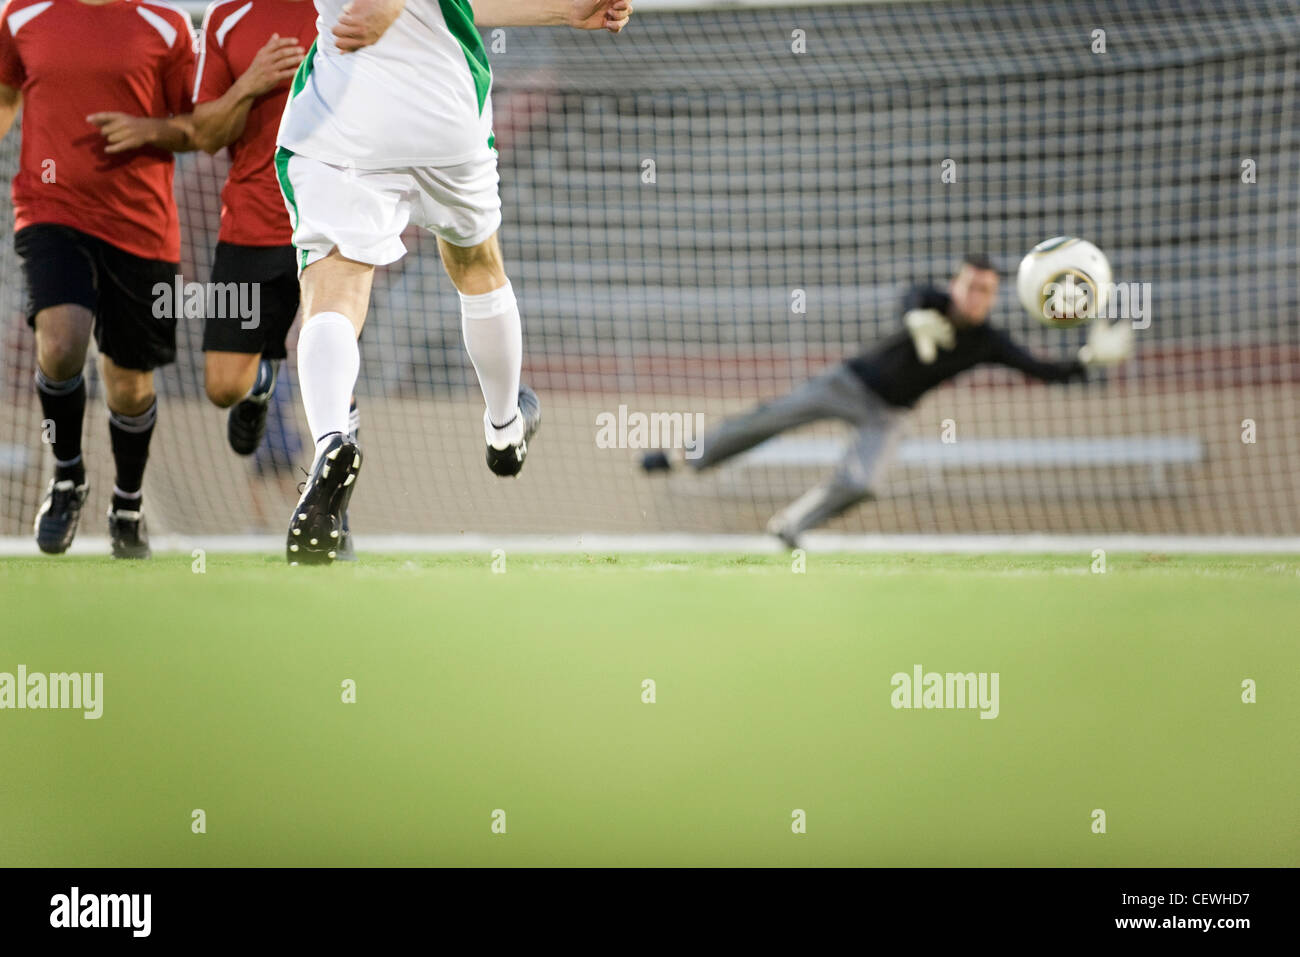 Soccer player shooting ball at goal, cropped Stock Photo